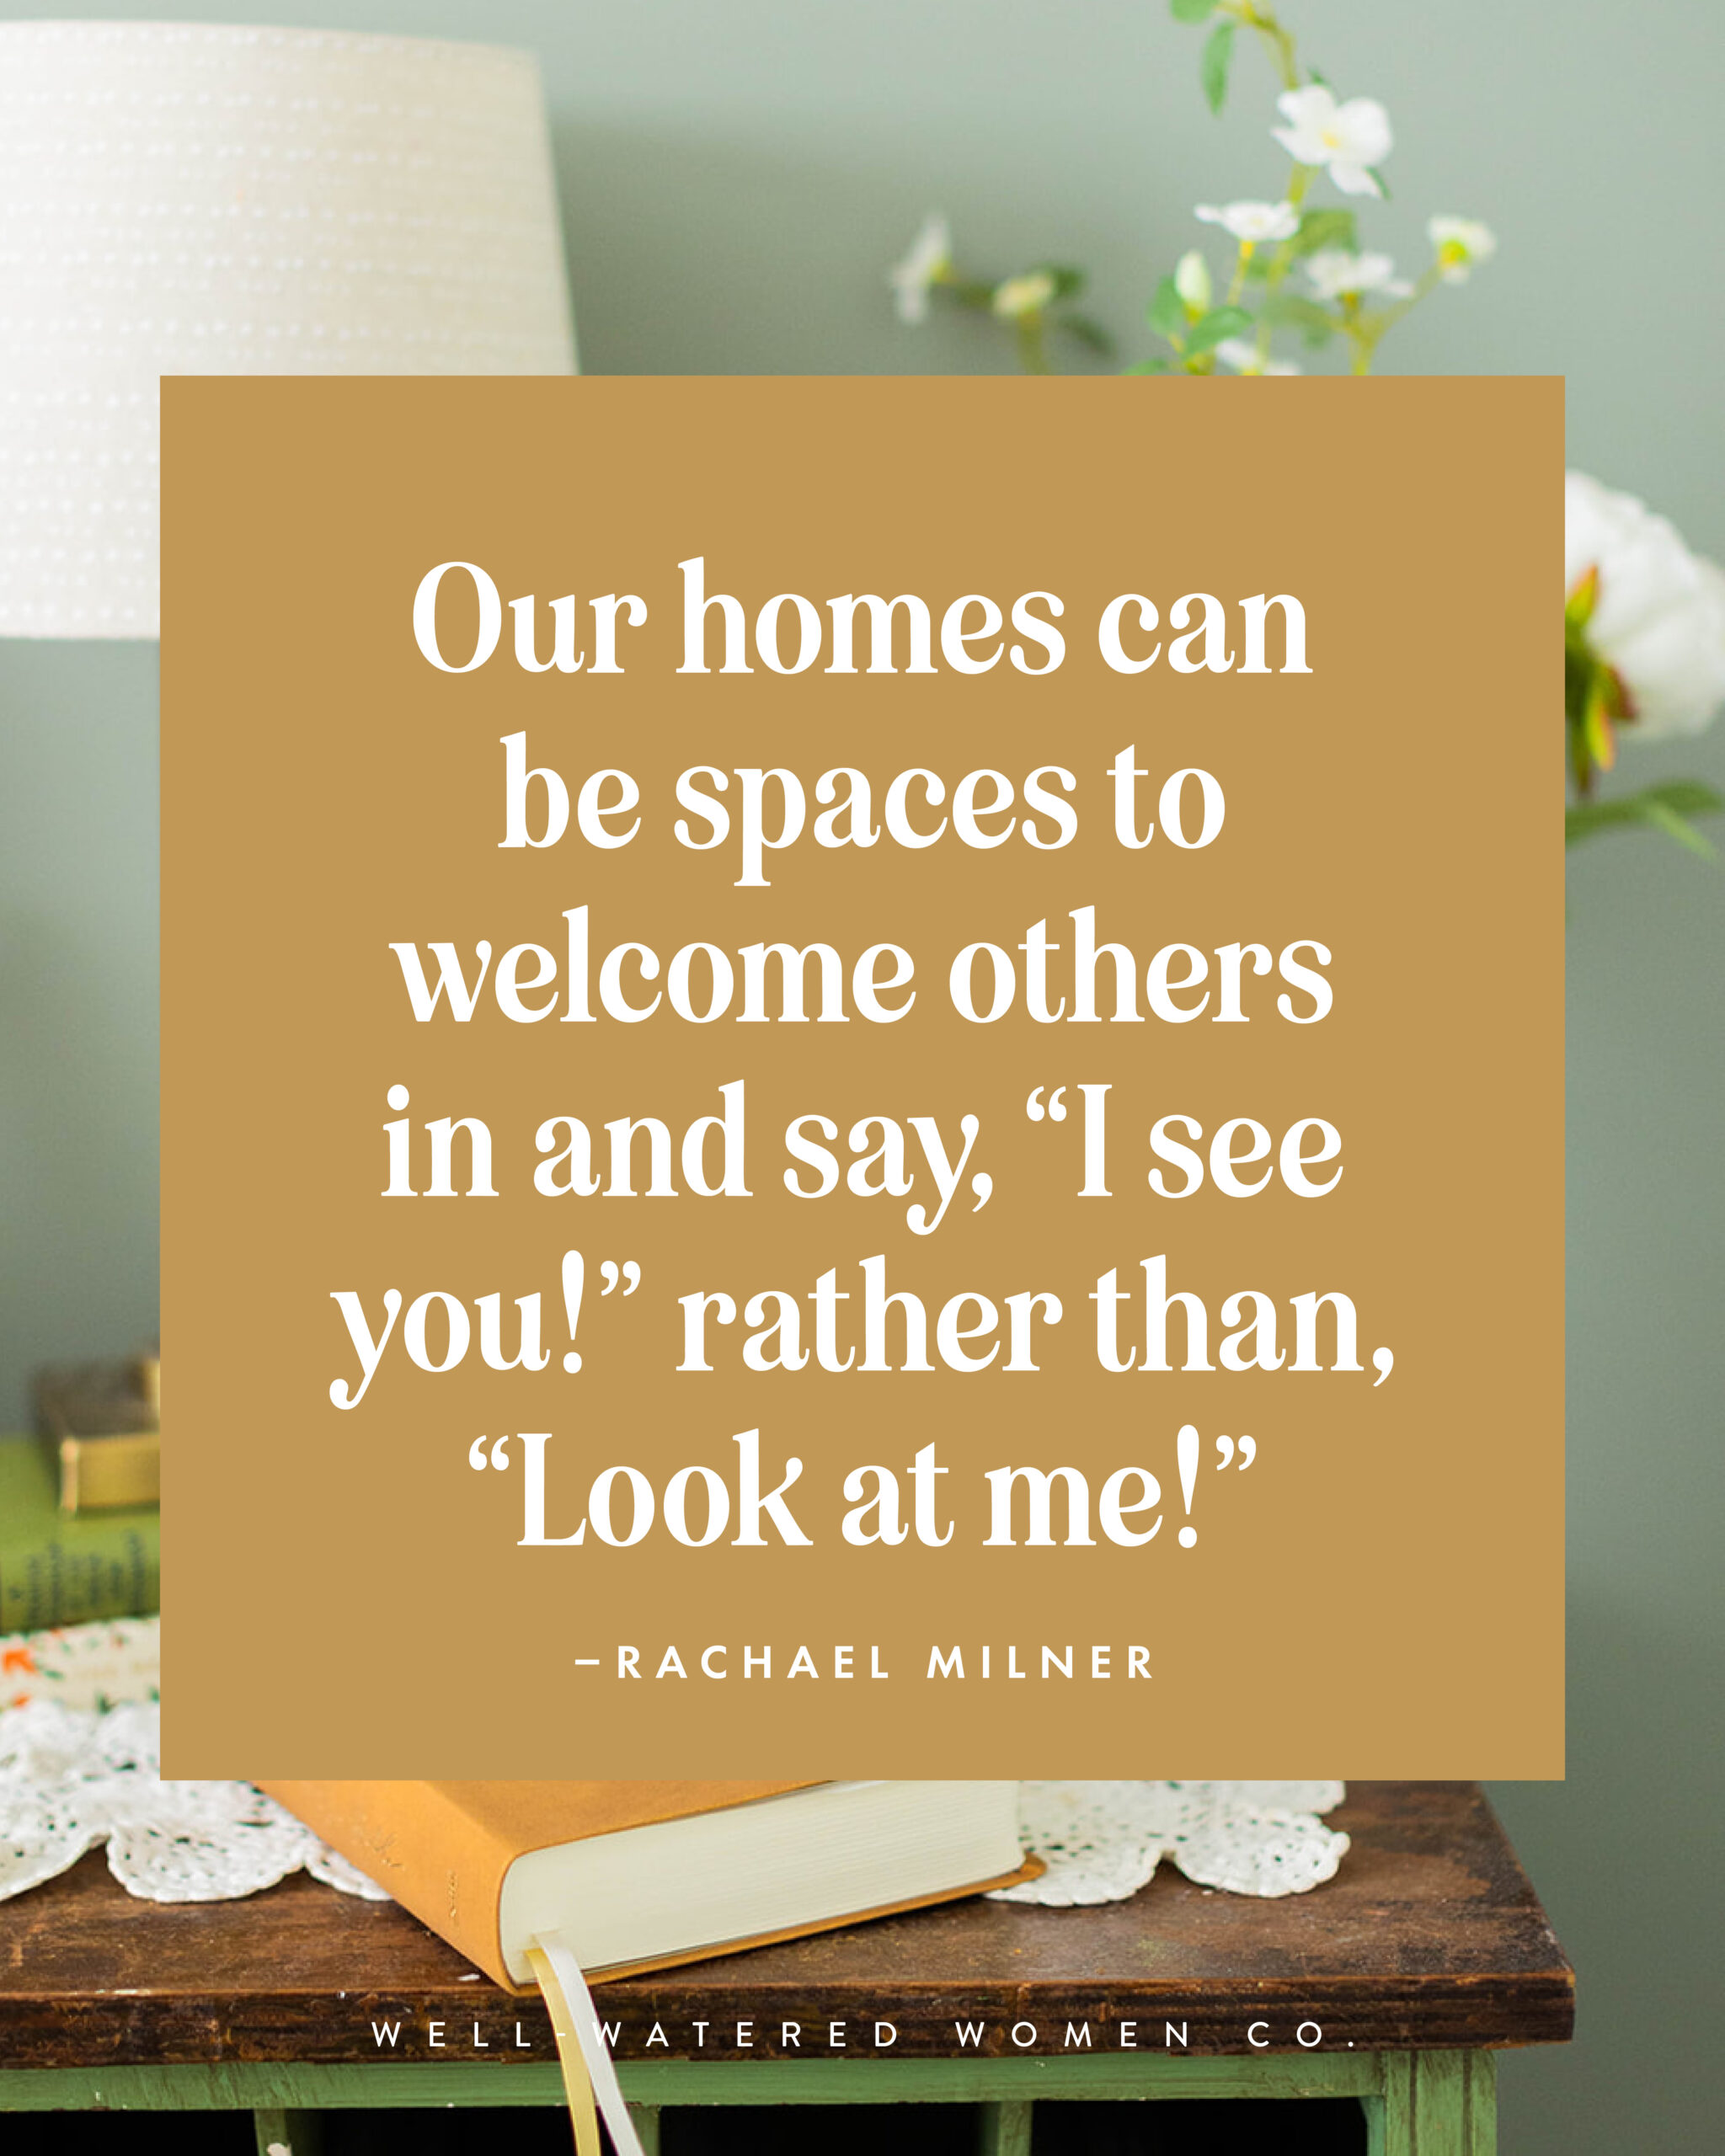 A Welcoming Home - an article from Well-Watered Women - quote